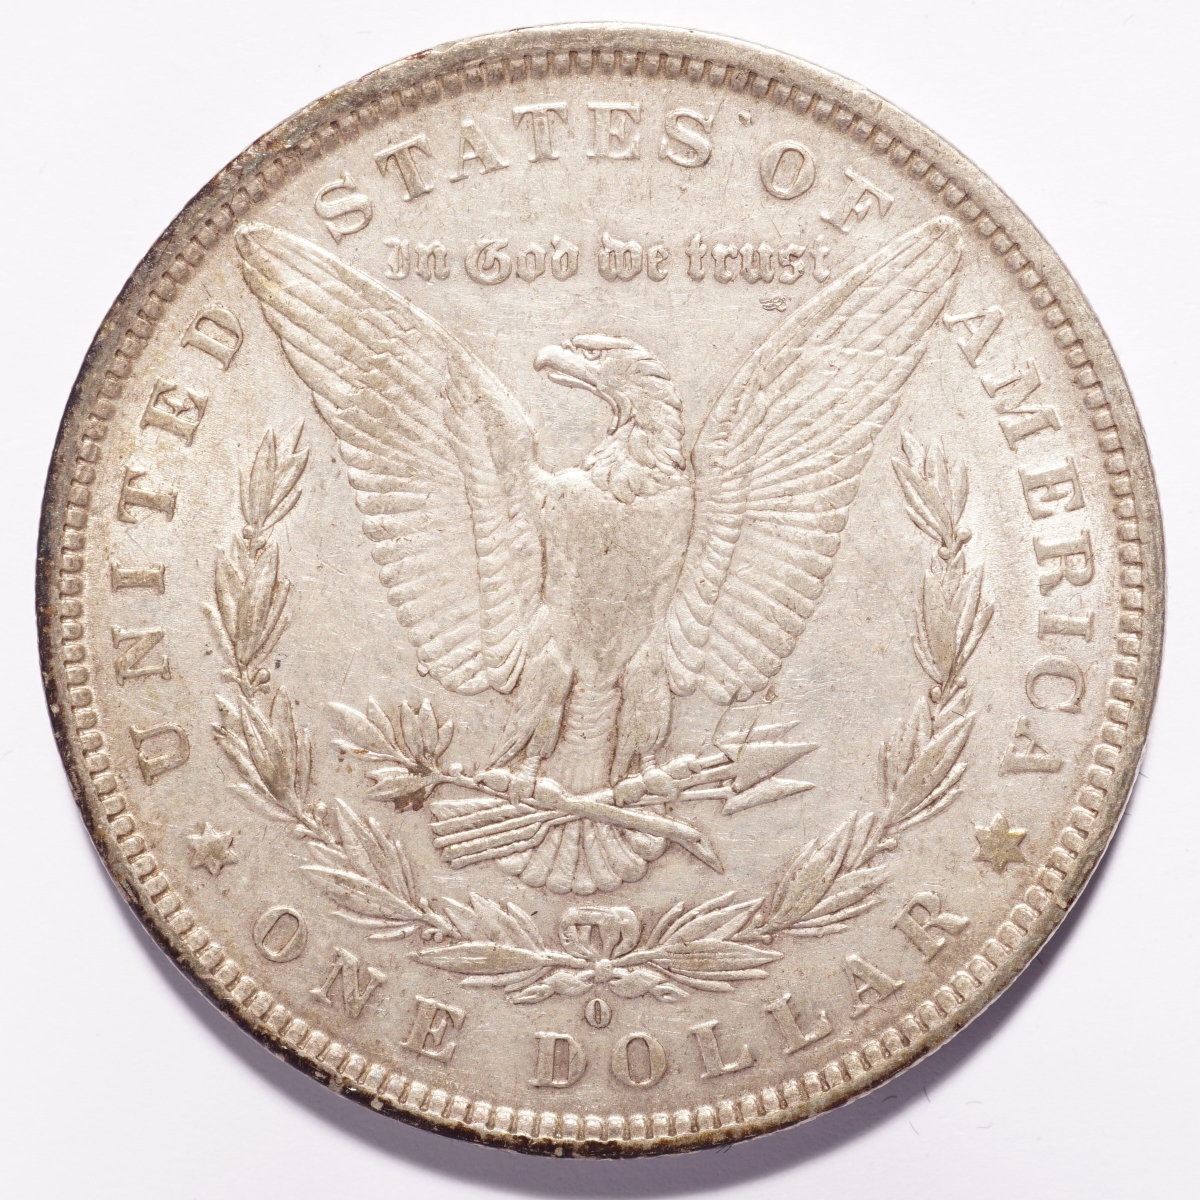 1898 $1 Morgan Silver Dollar NGC MS64 Old Brown Label - Free Shipping USA -  The Happy Coin